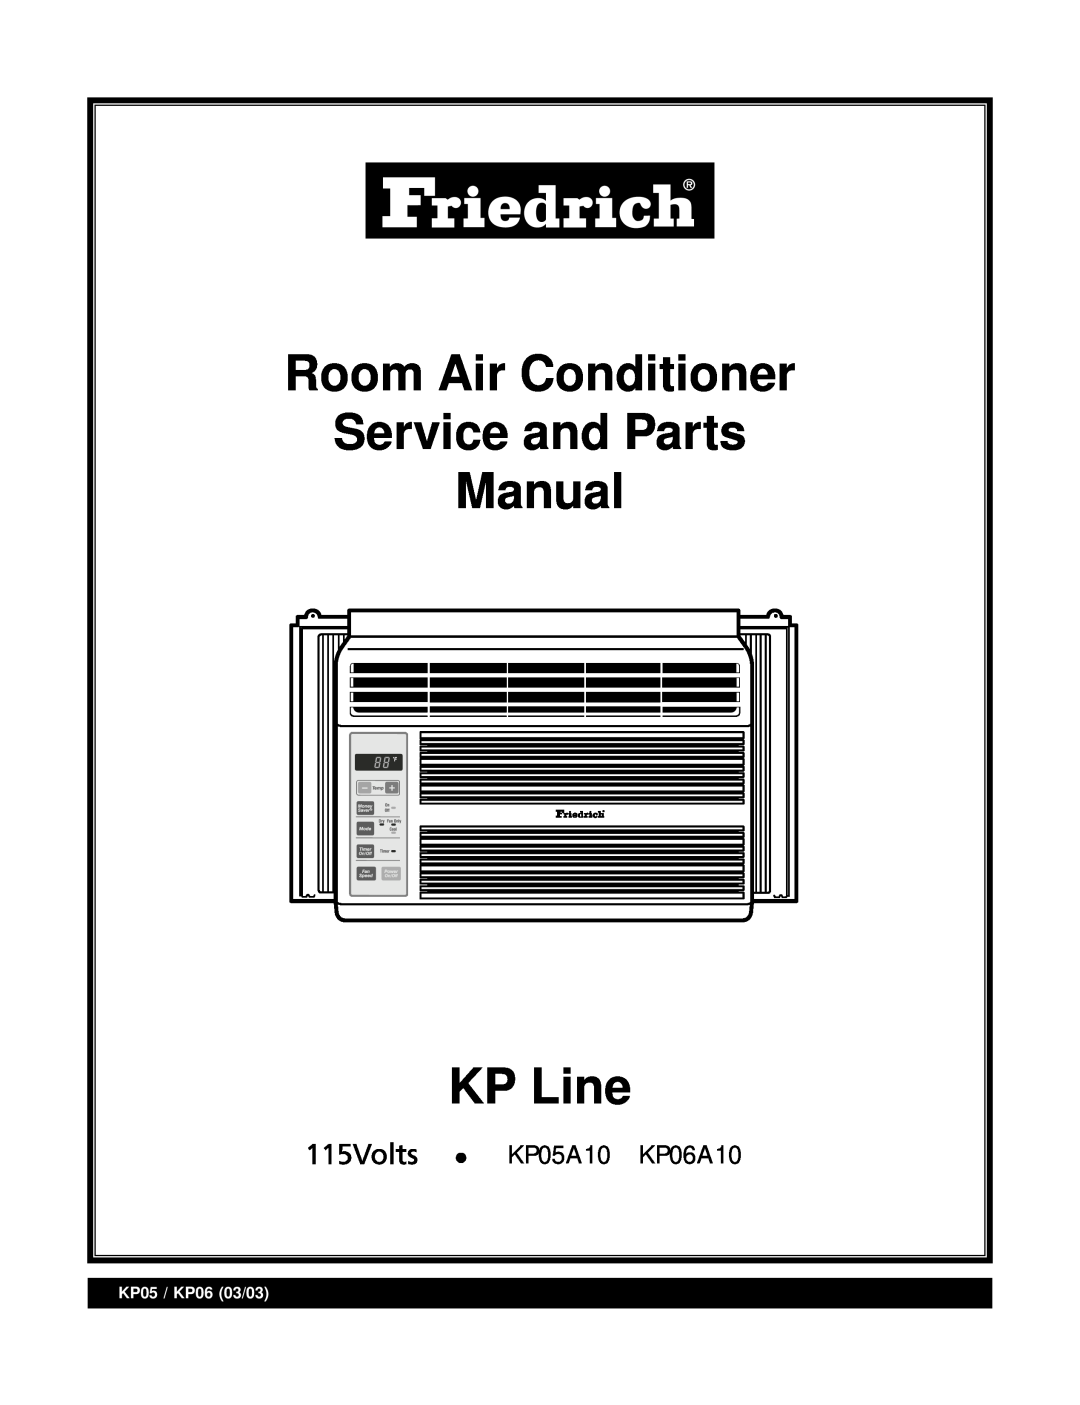 Friedrich KP05A10 KP06A10 manual Room Air Conditioner Service and Parts Manual, KP Line, KP05 / KP06 03/03 